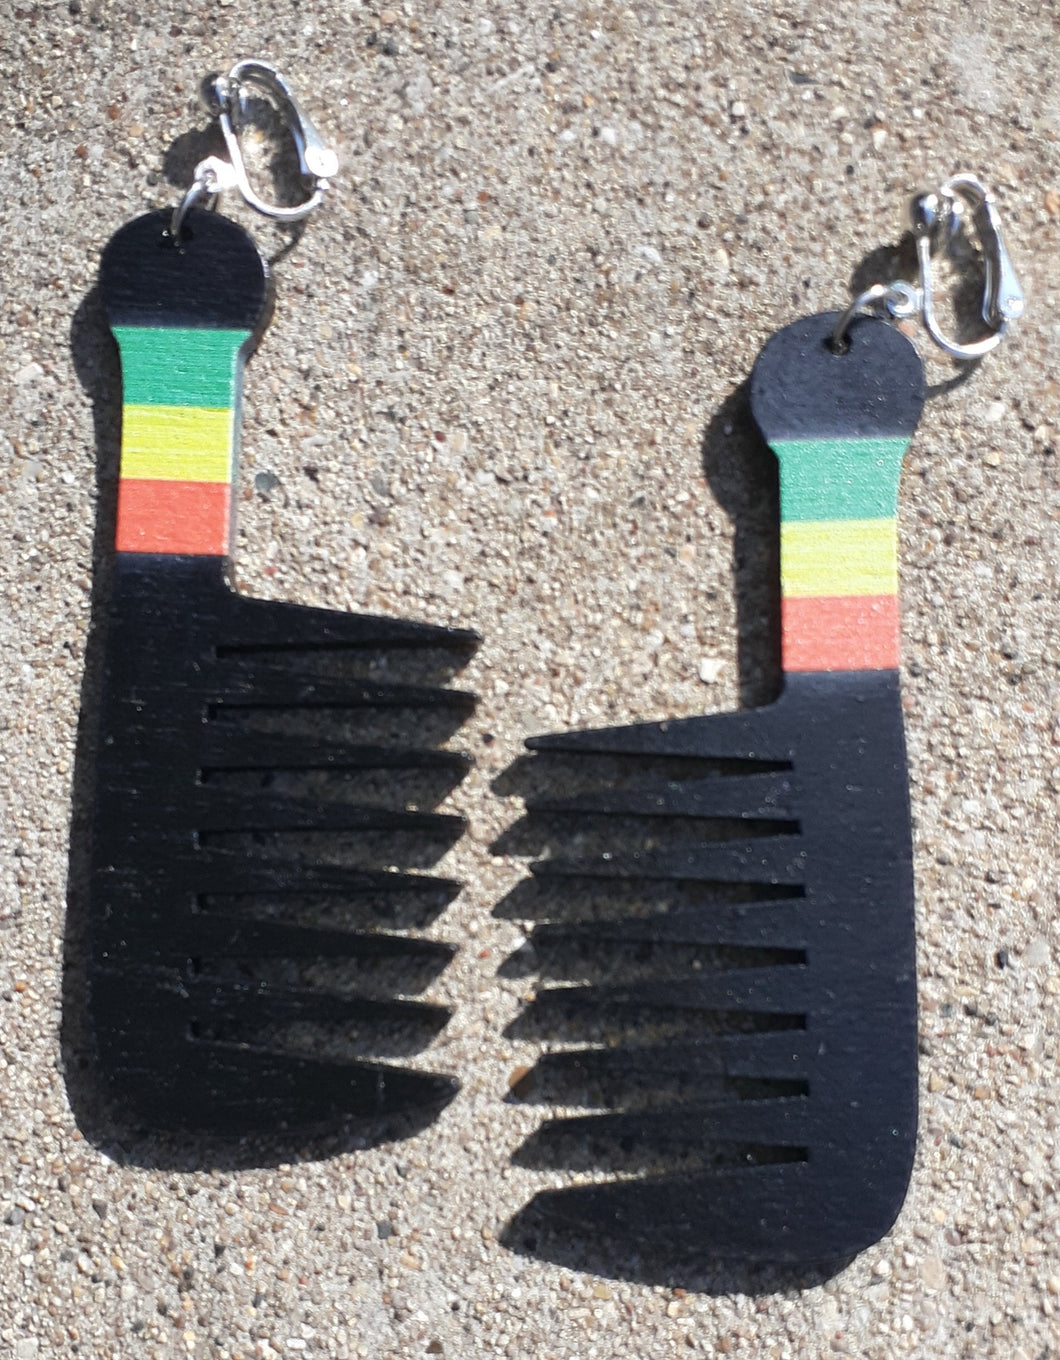 Large afrocentric themed wooden Clip On Afro Comb Earrings Kargo Fresh